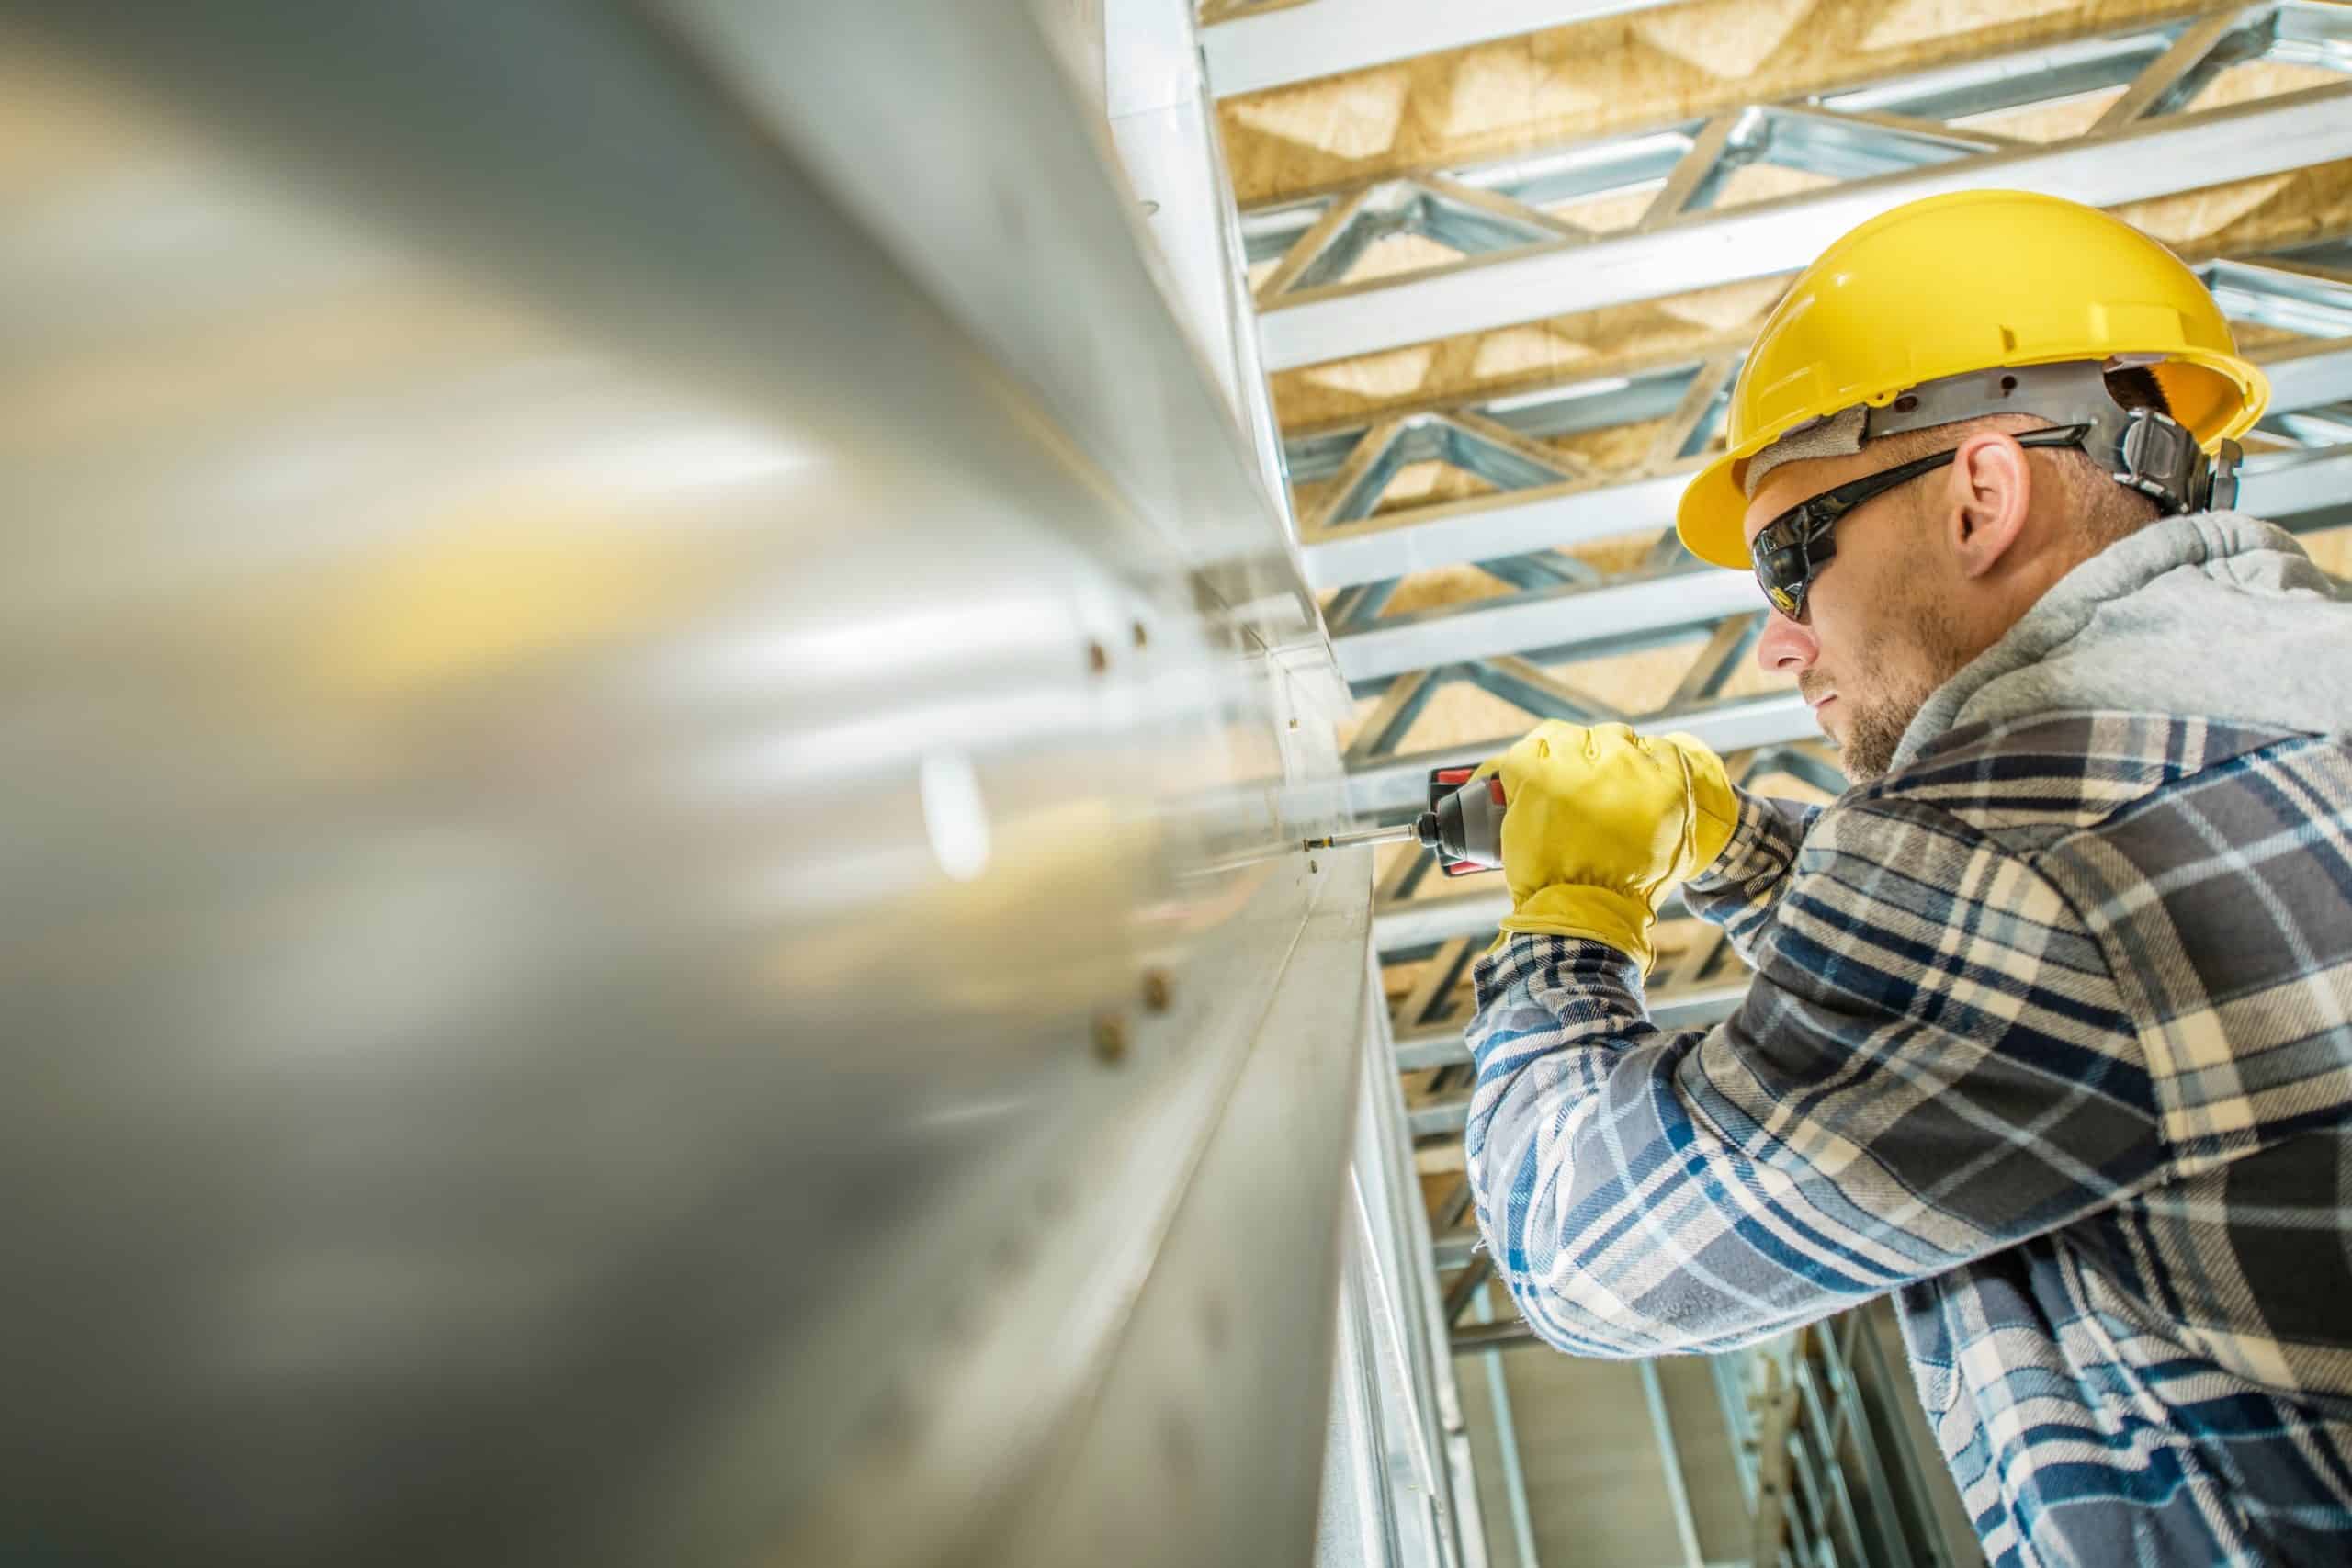 A steel building contractor drills into a wall as he dominates the competition by building the best. He is wearing flannel and a yellow hard hat.